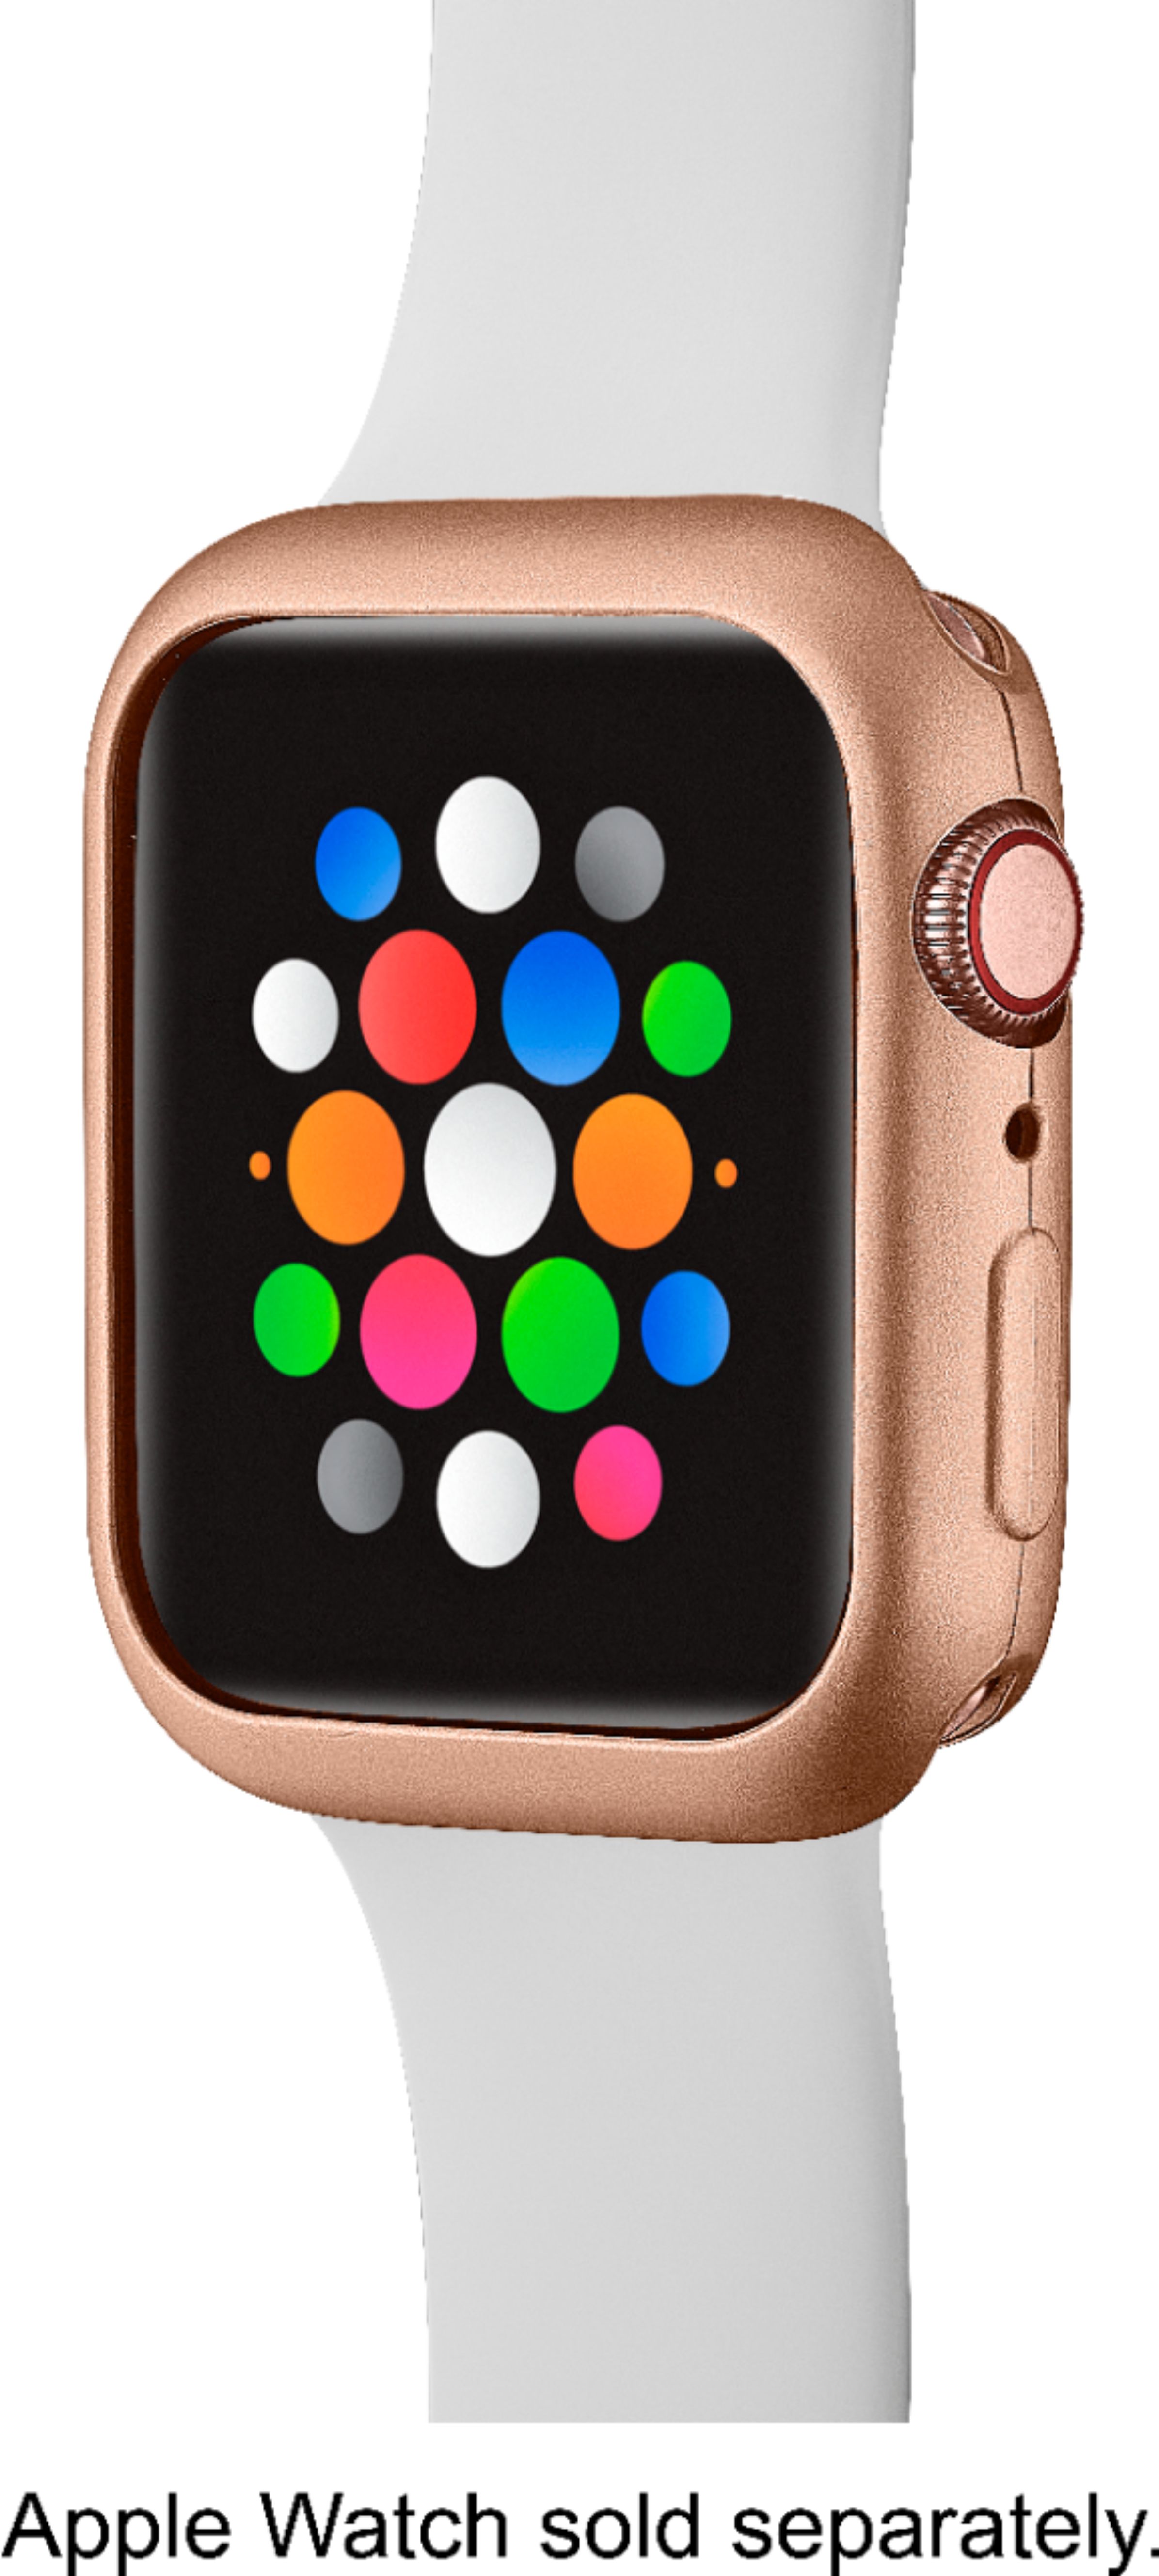 Left View: kate spade new york - Silicone Watch Strap for Apple Watch™ 42mm Series 1, 2, 3, and Apple Watch™ 44mm Series 4 and 5 - Dotted Black